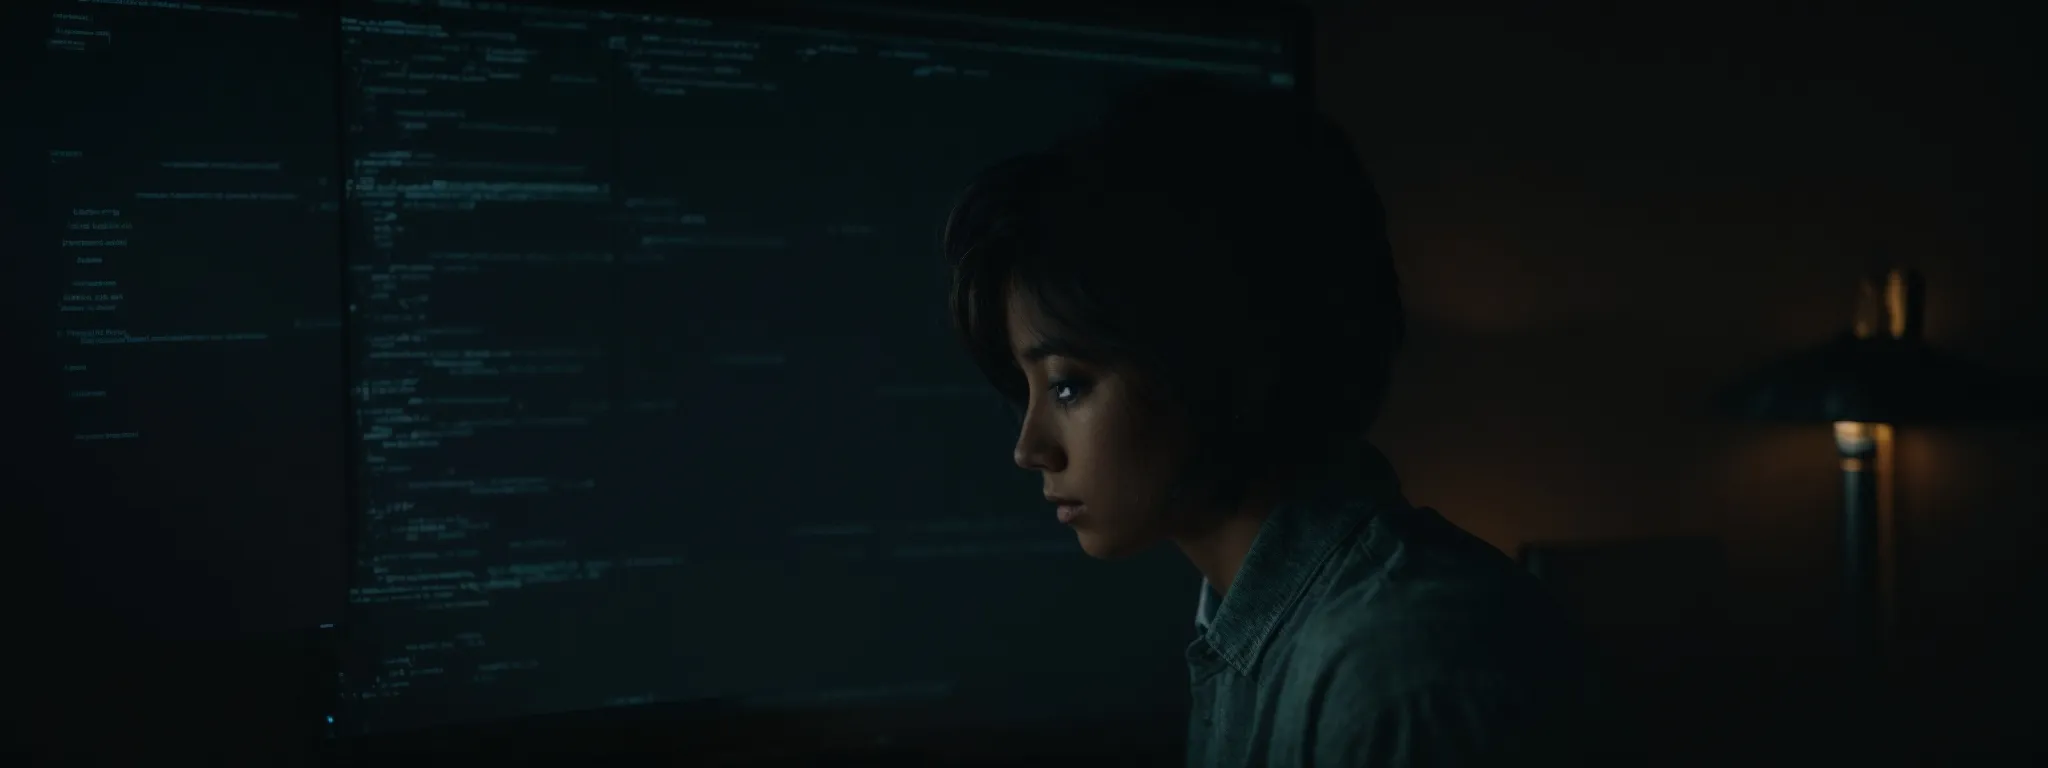 a focused individual scrutinizes lines of code on a computer screen in a dimly lit room, embodying the analytical pursuit of untangling website redirect issues.